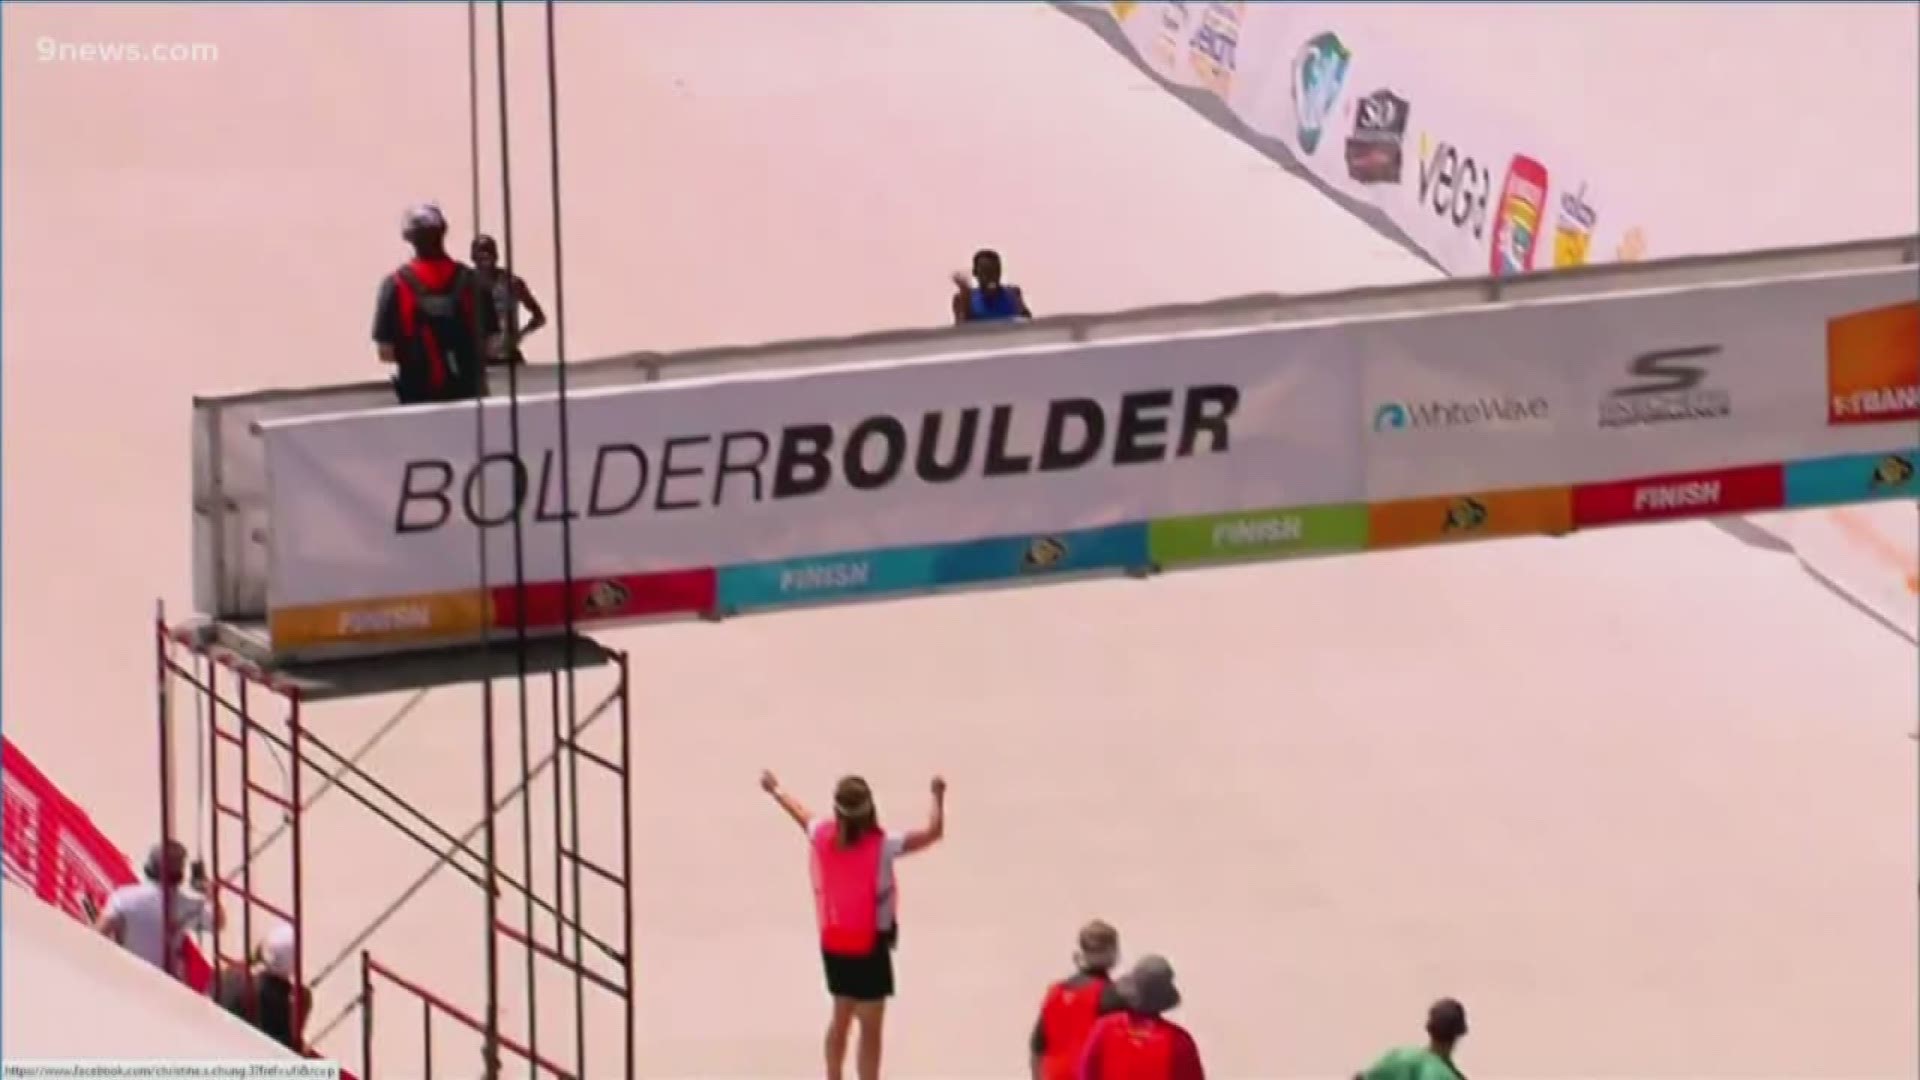 Bolder Boulder celebrates 40 years as a family tradition